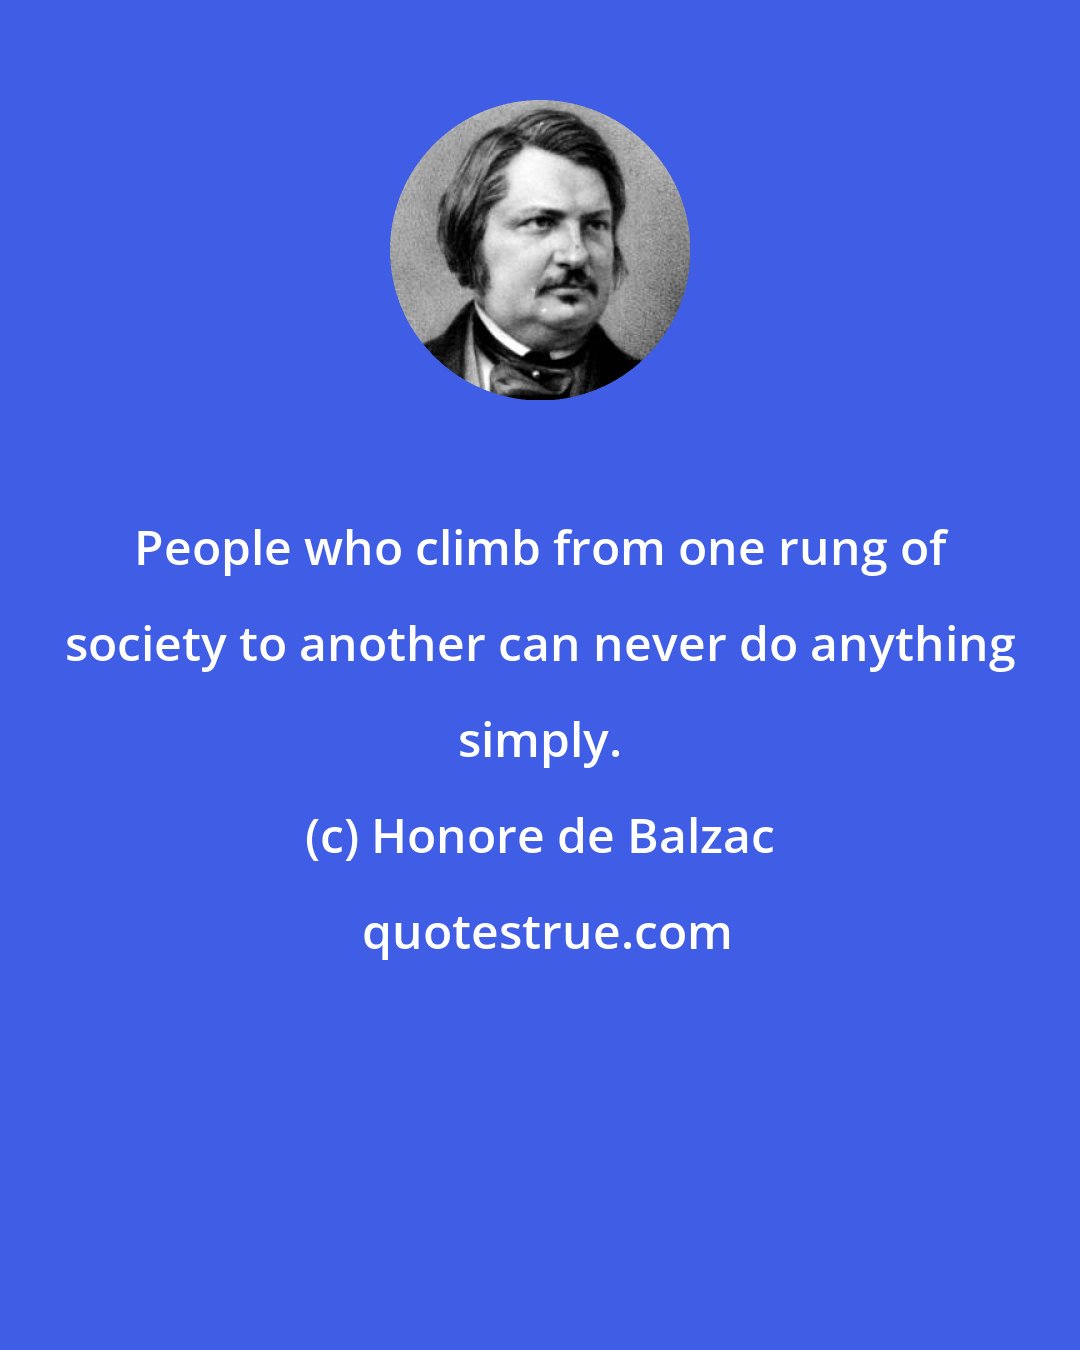 Honore de Balzac: People who climb from one rung of society to another can never do anything simply.